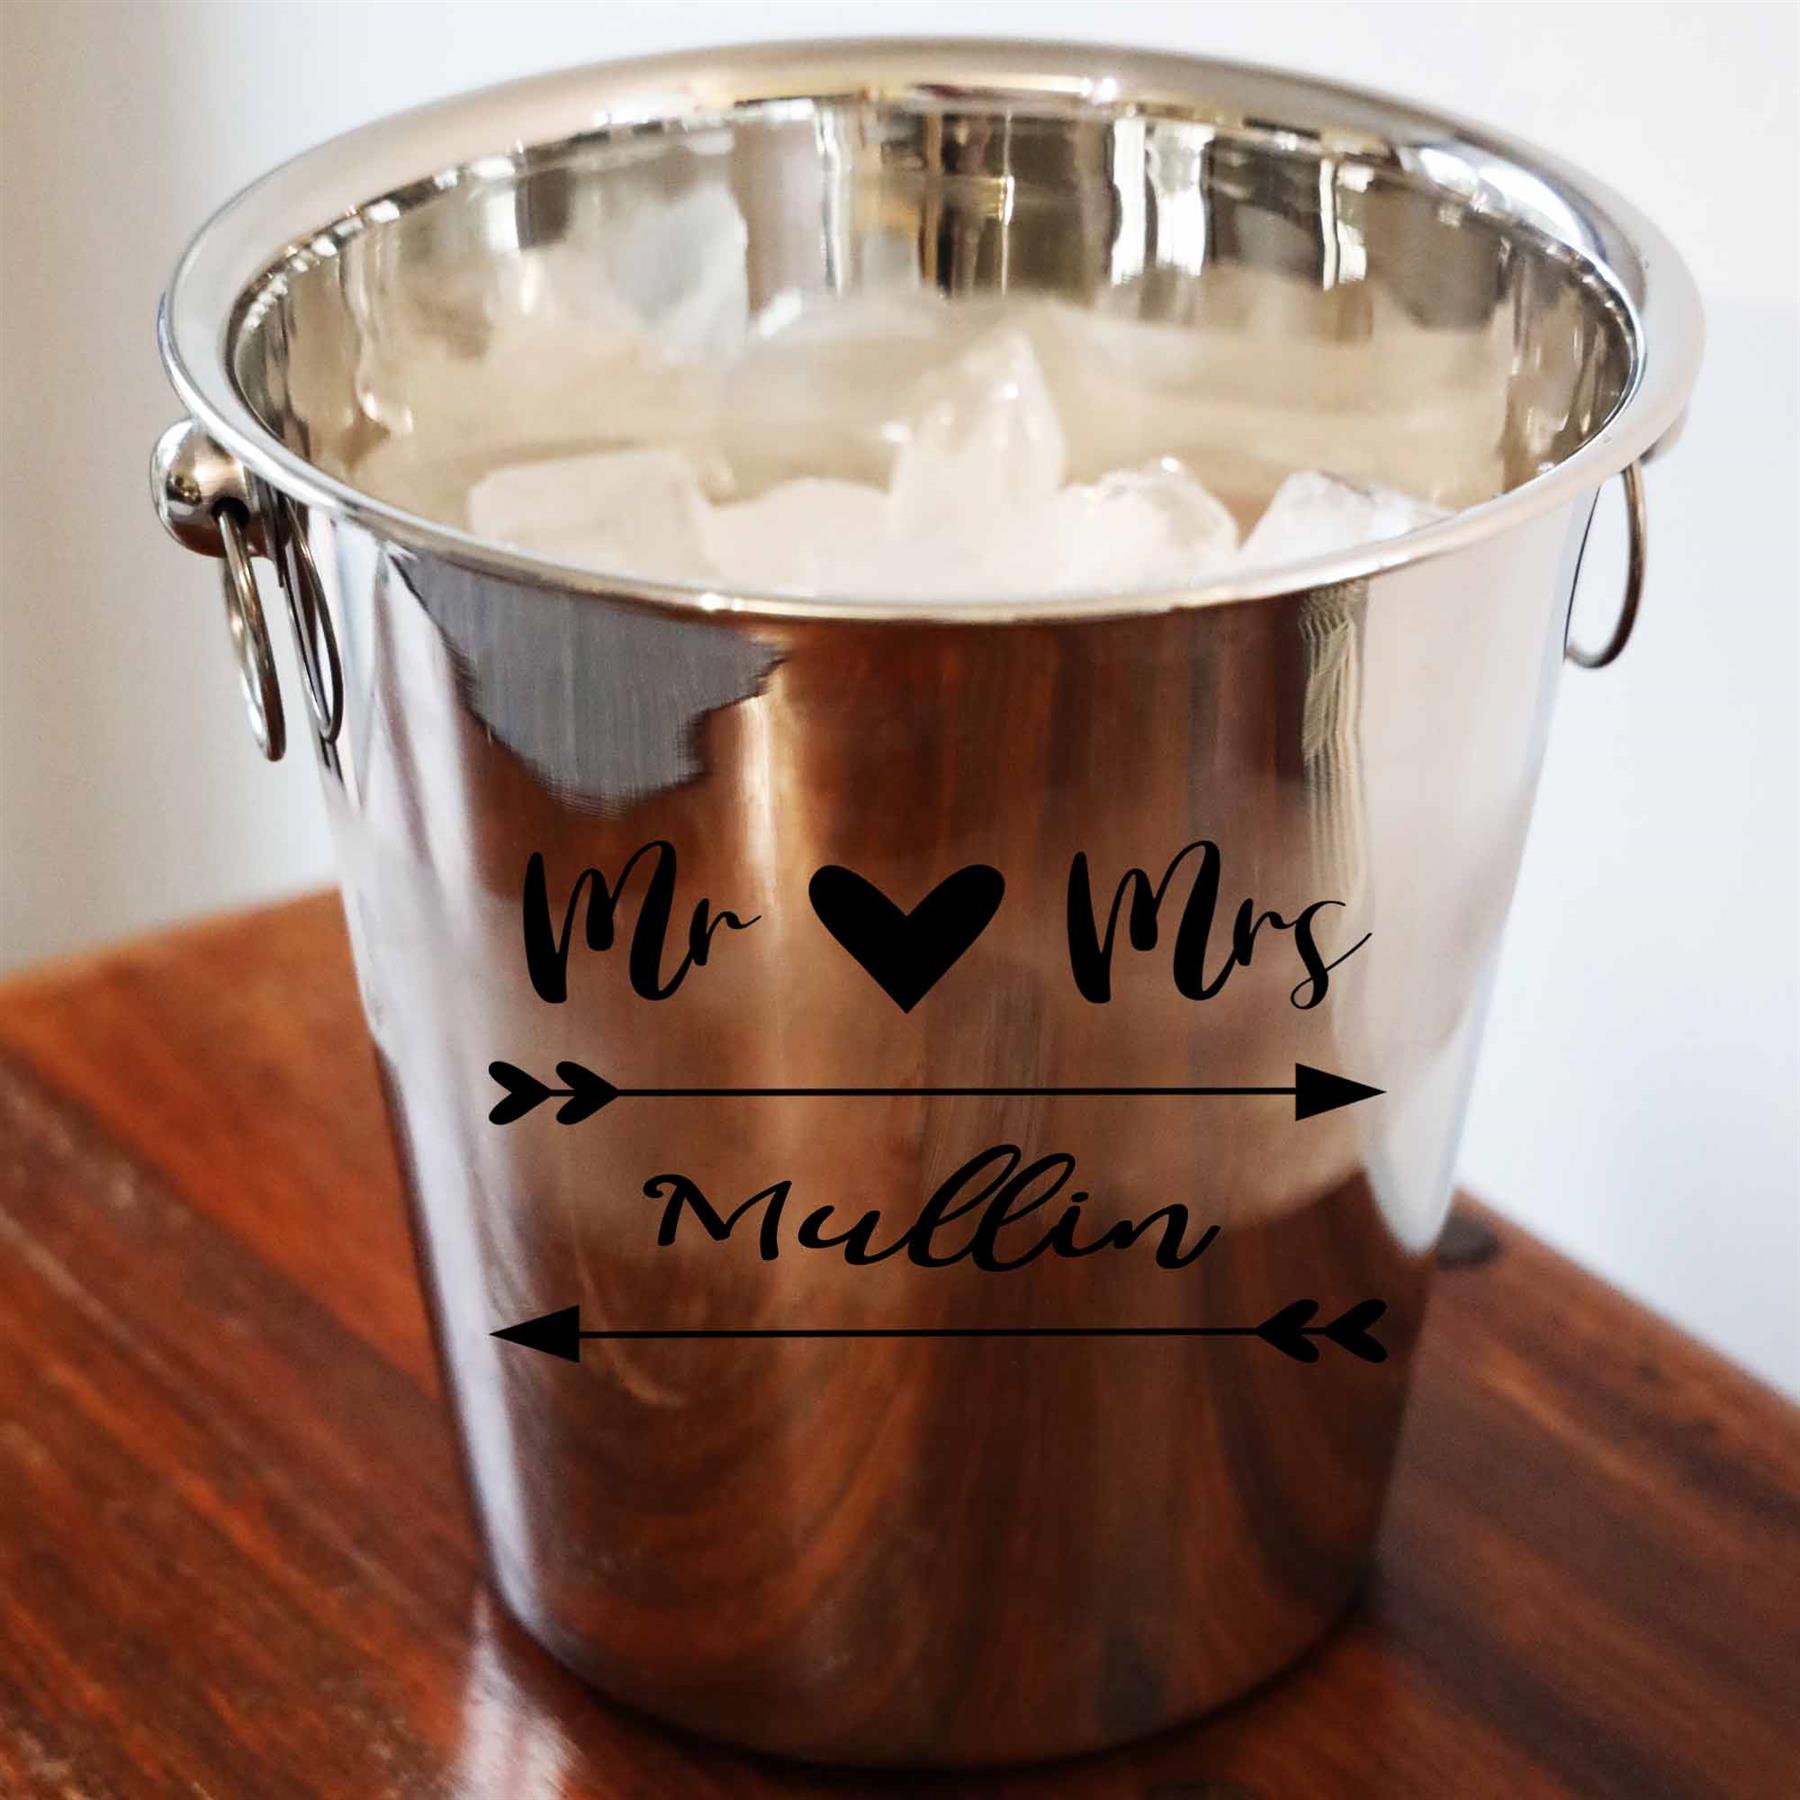 Personalised Mr & Mrs/ Mr & Mr / Mrs & Mrs Ice Bucket With matching Champagne Glasses  - Always Looking Good -   